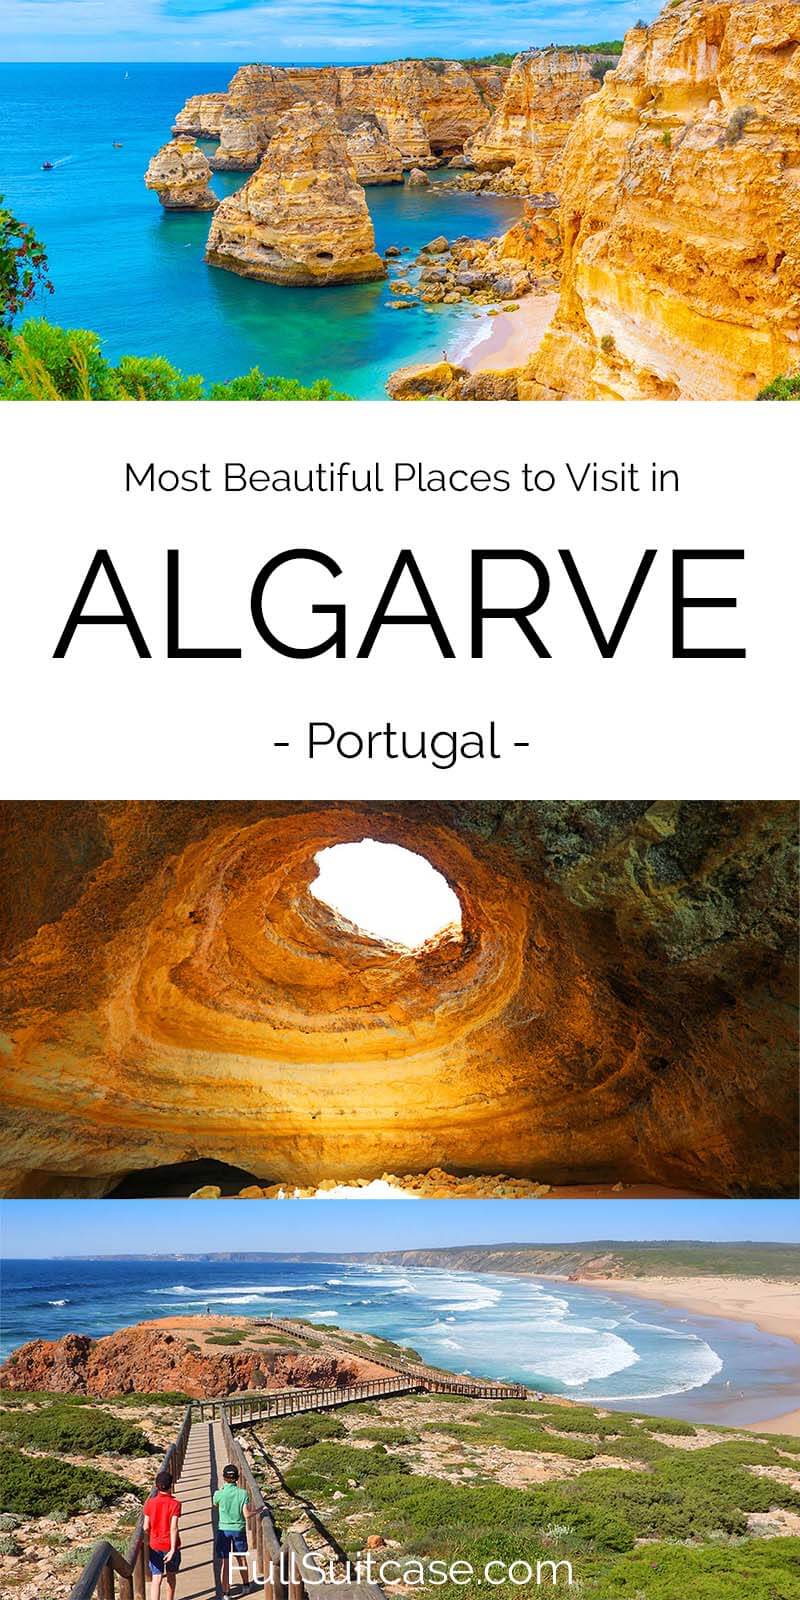 Most beautiful places to visit in Algarve Portugal